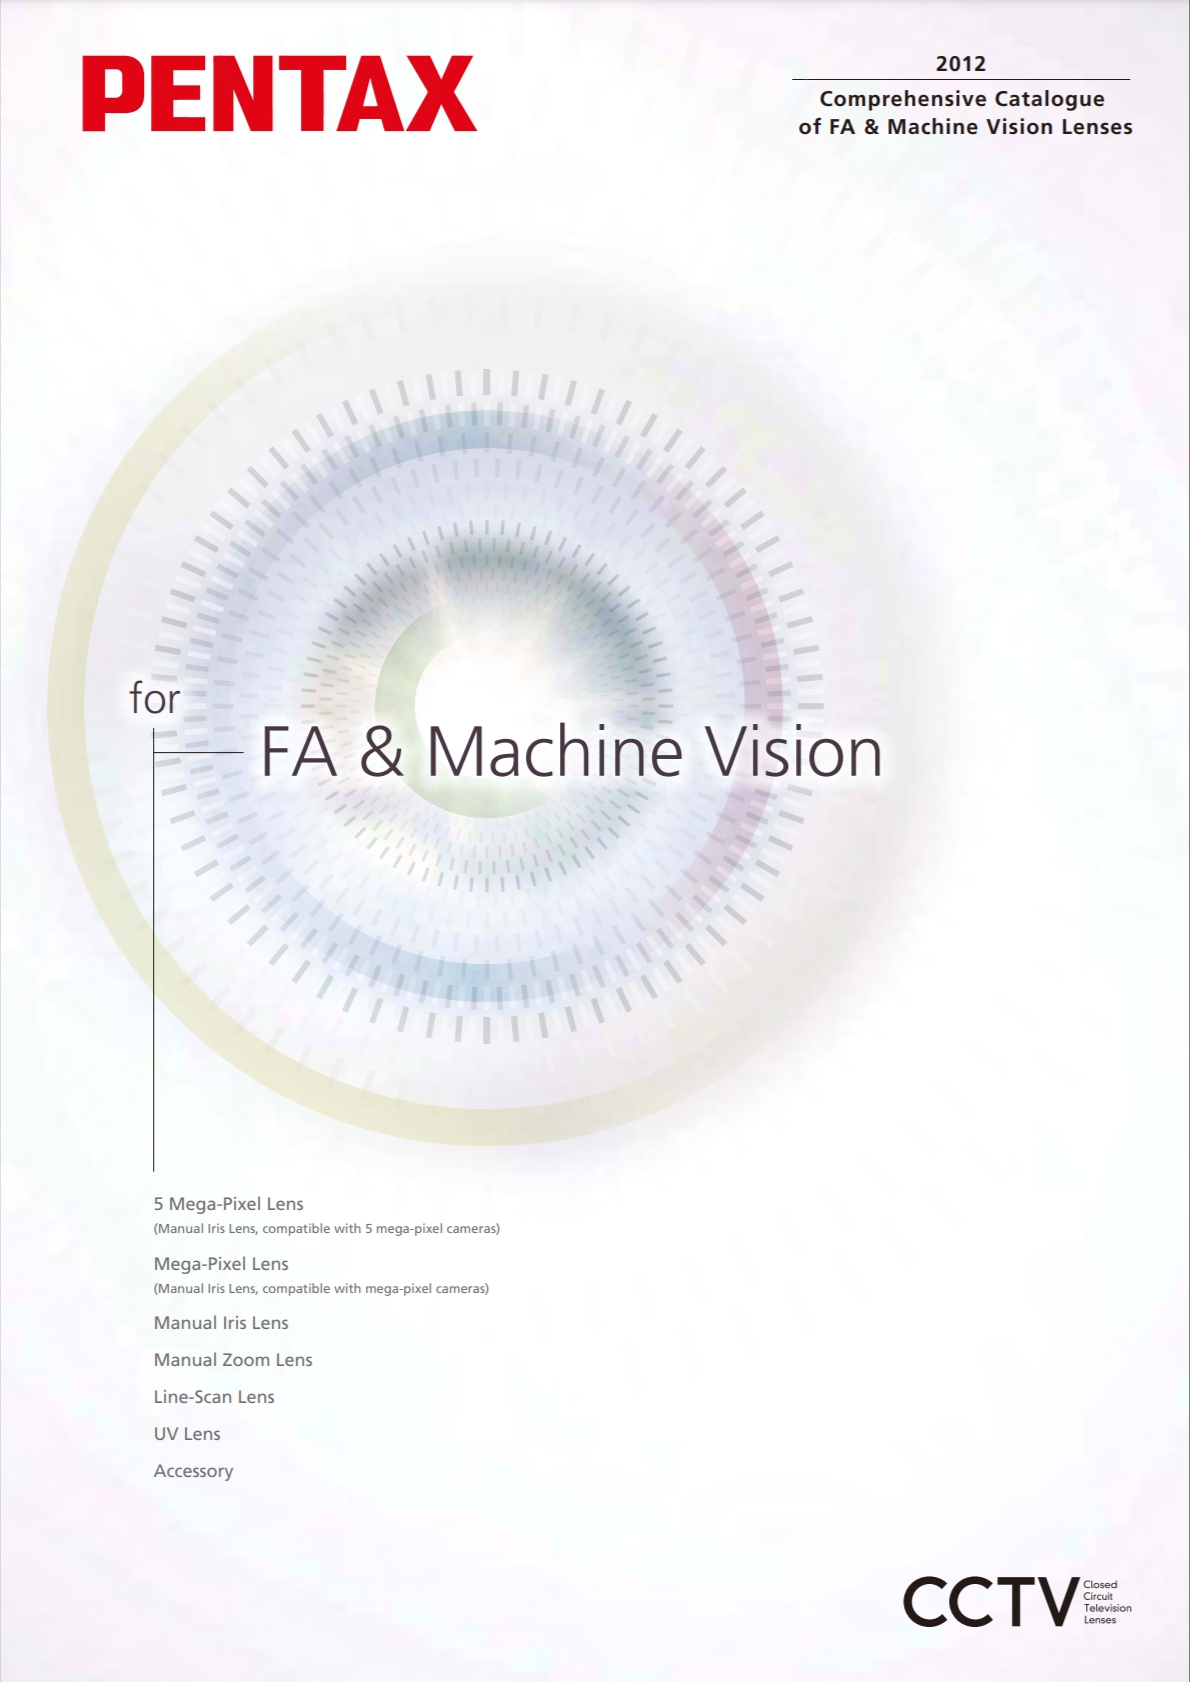 a catalogue of Pentax CCTV lenses for FA and machine vision